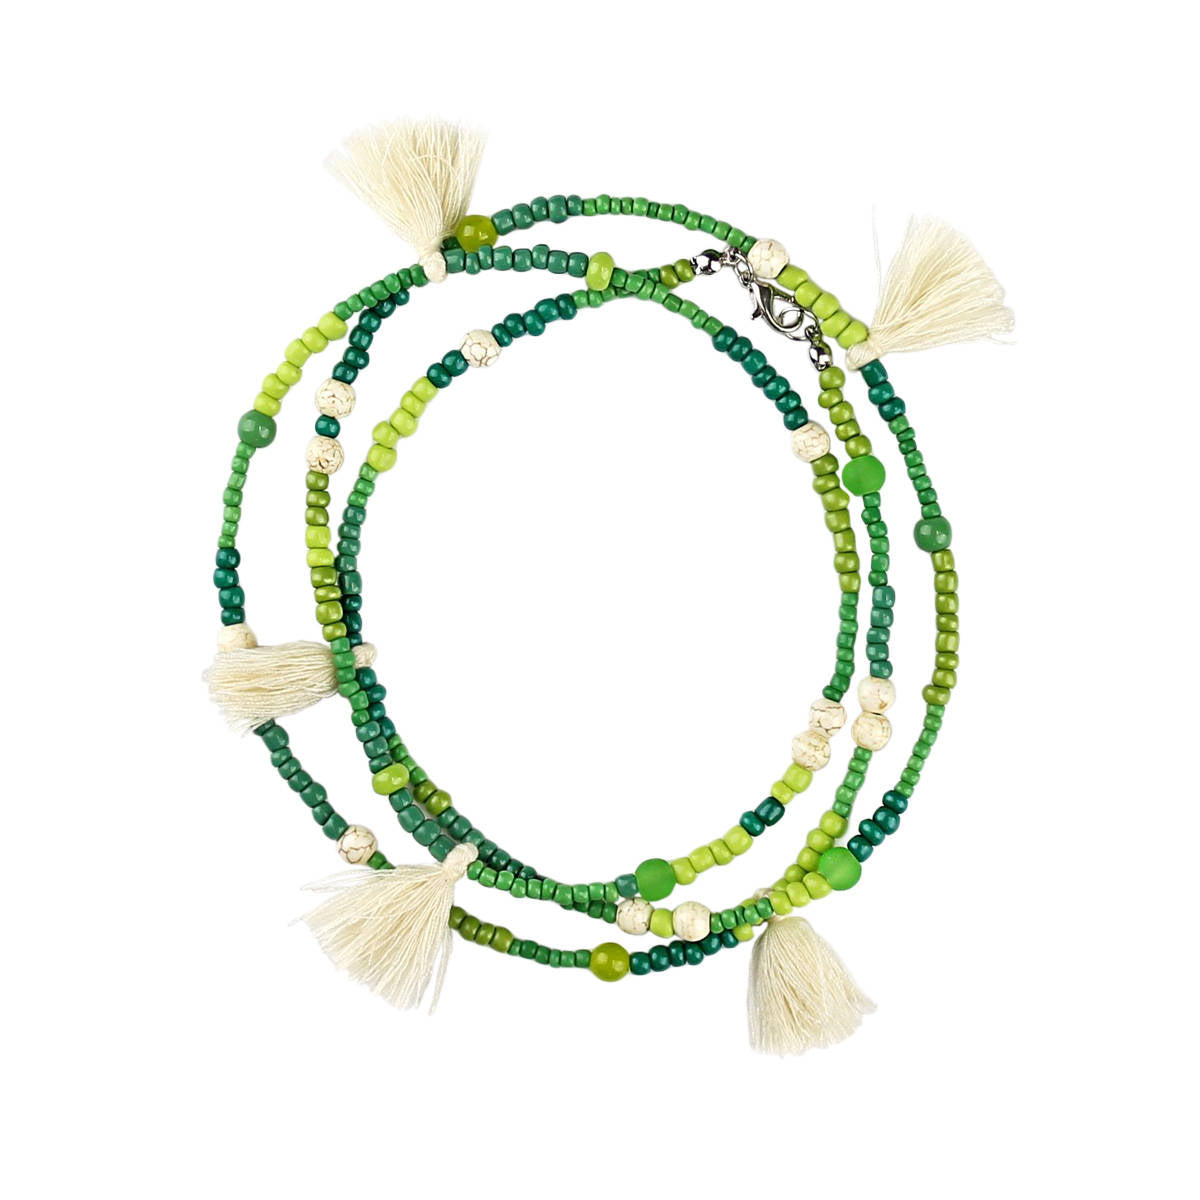 Multi Tassel Necklace Bohemian Style with Glass and Seed Beads - Earth Green Tones